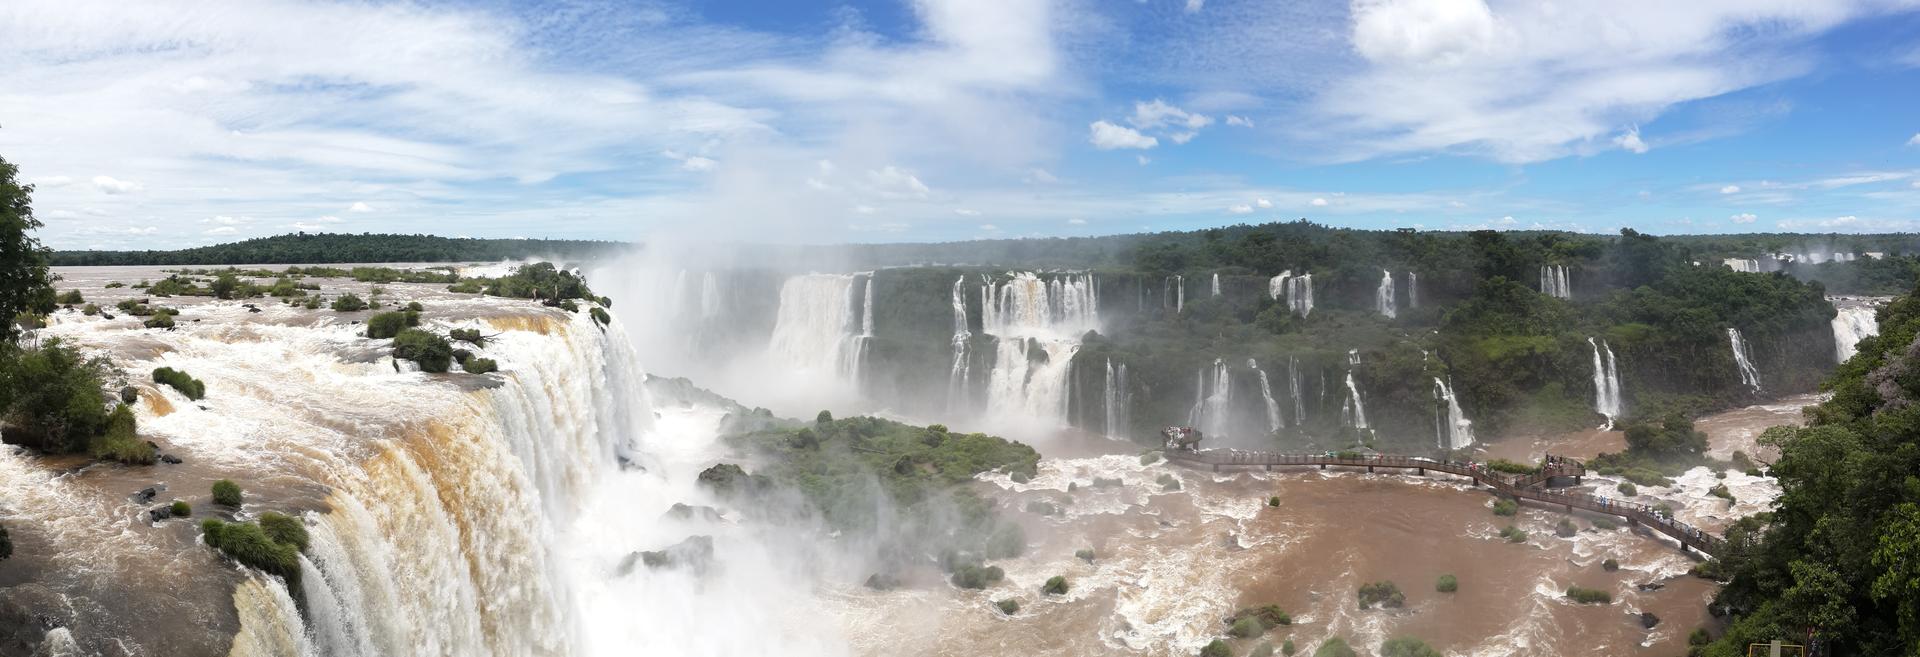 Iguazu Falls, Brazil - Panorama. This view was from Brazilian side lookout tower.